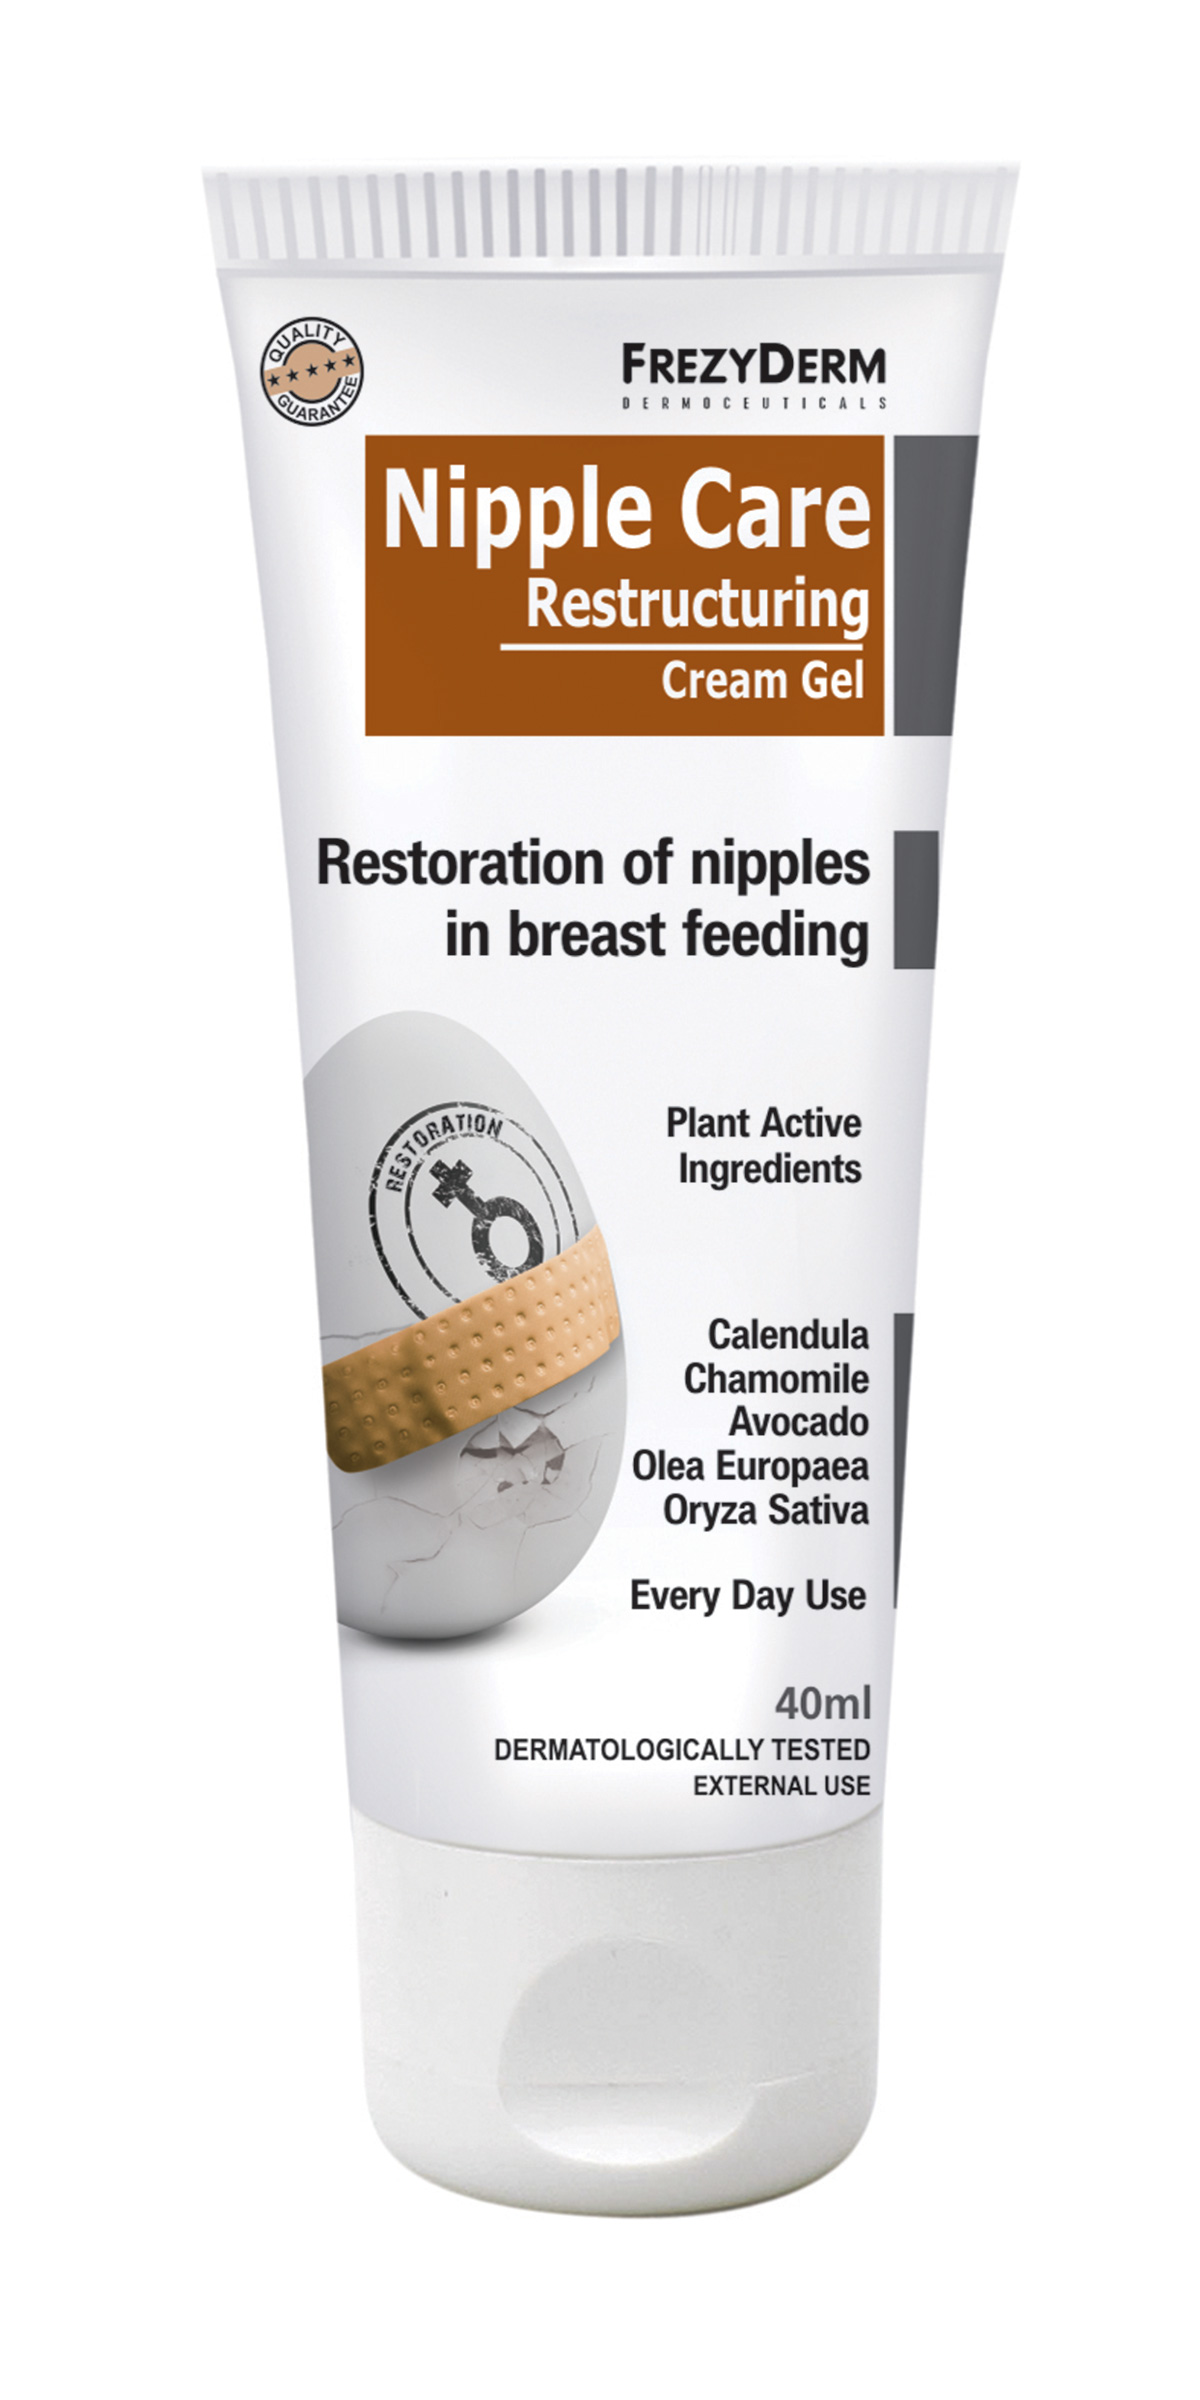 http://dbl-healthcare.com/assets/images/all-product/large/Nipple_Care_Restructuring.jpg